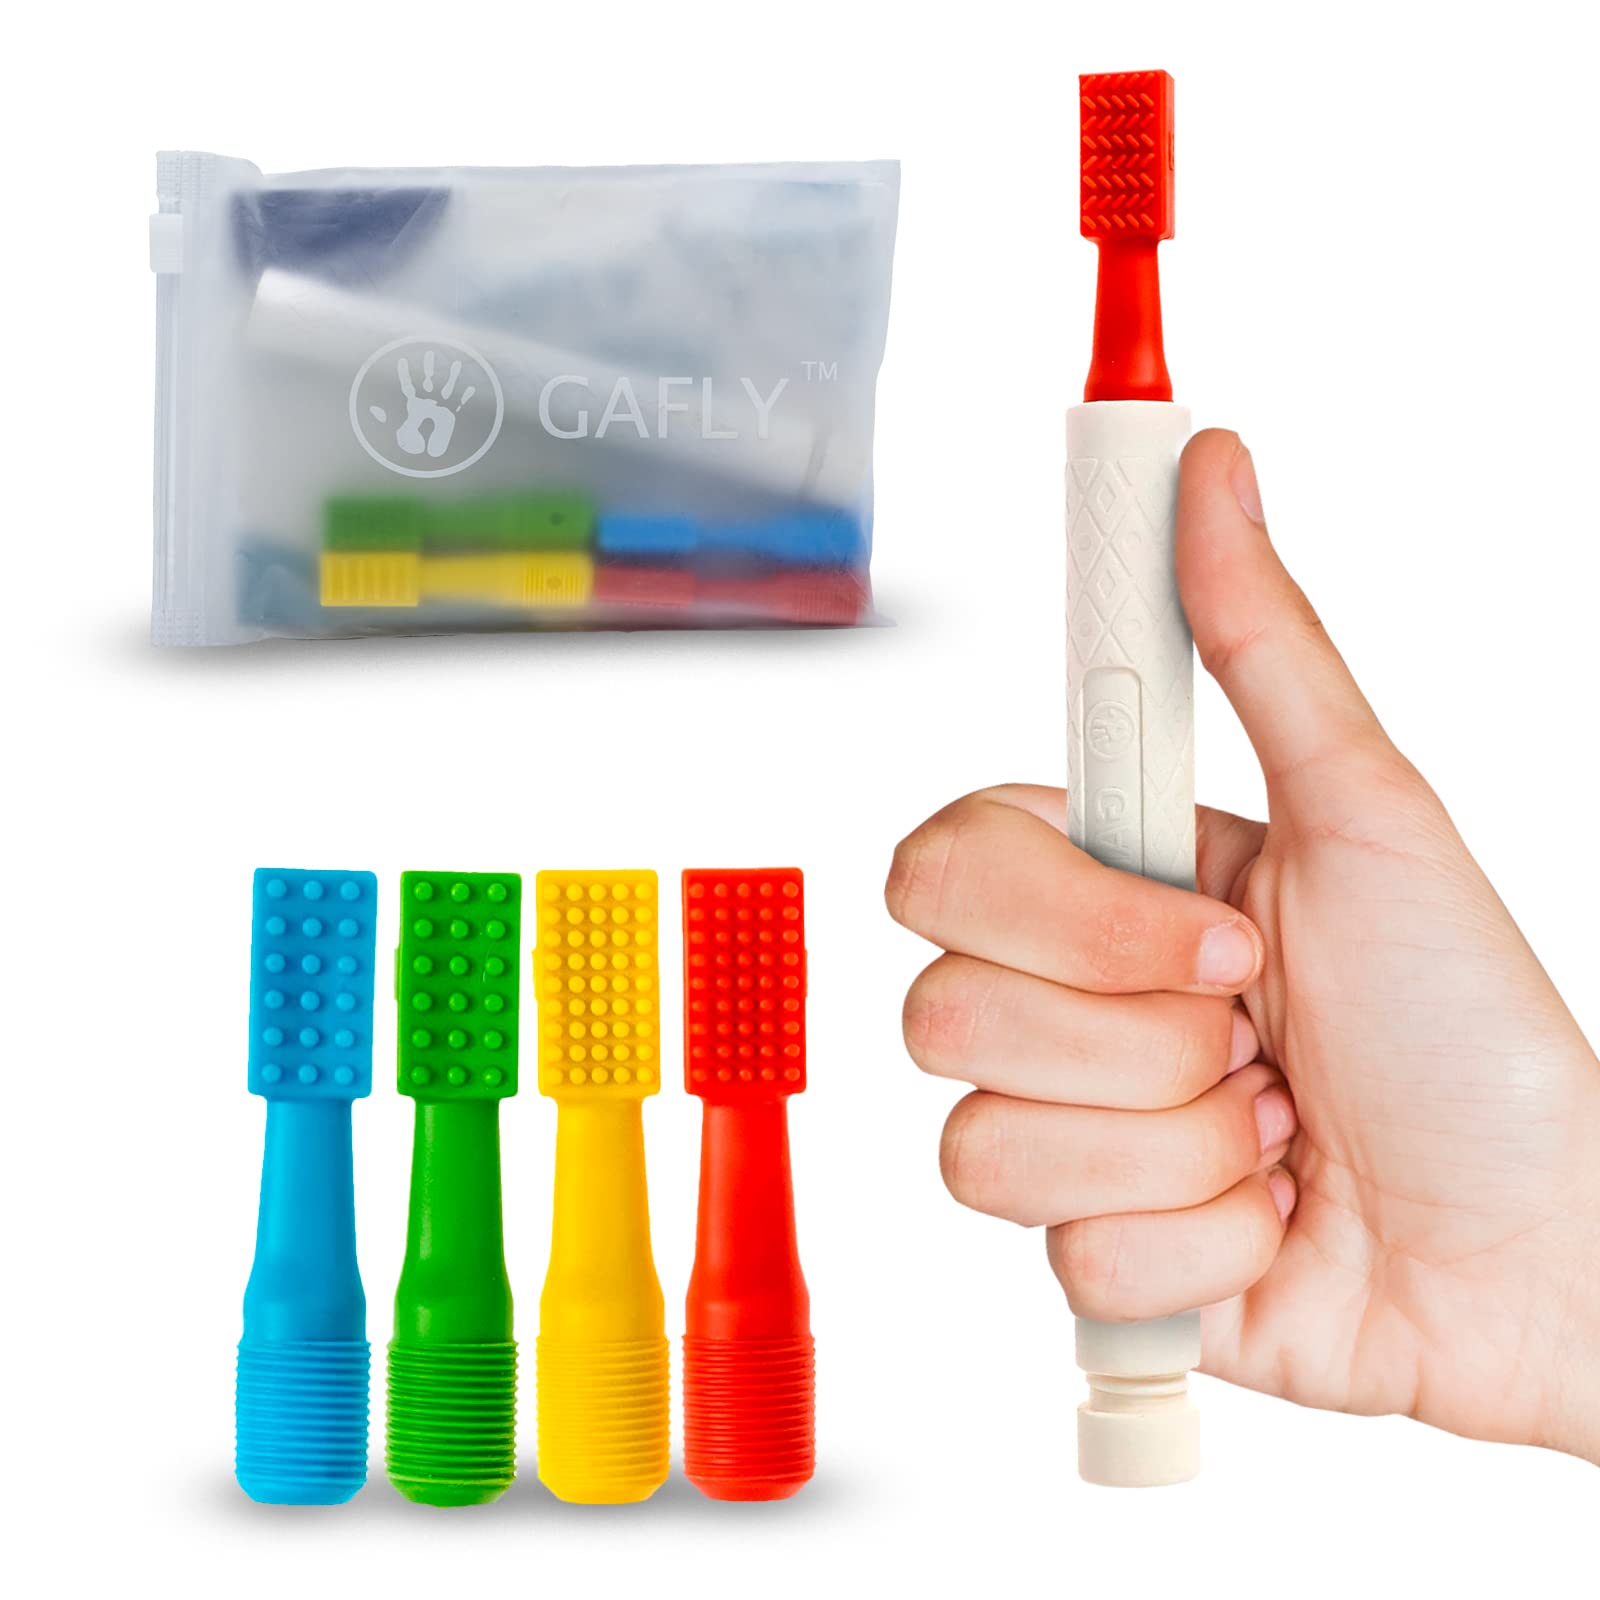 Tongs and Tools Add-On Kit, Autism Specialties